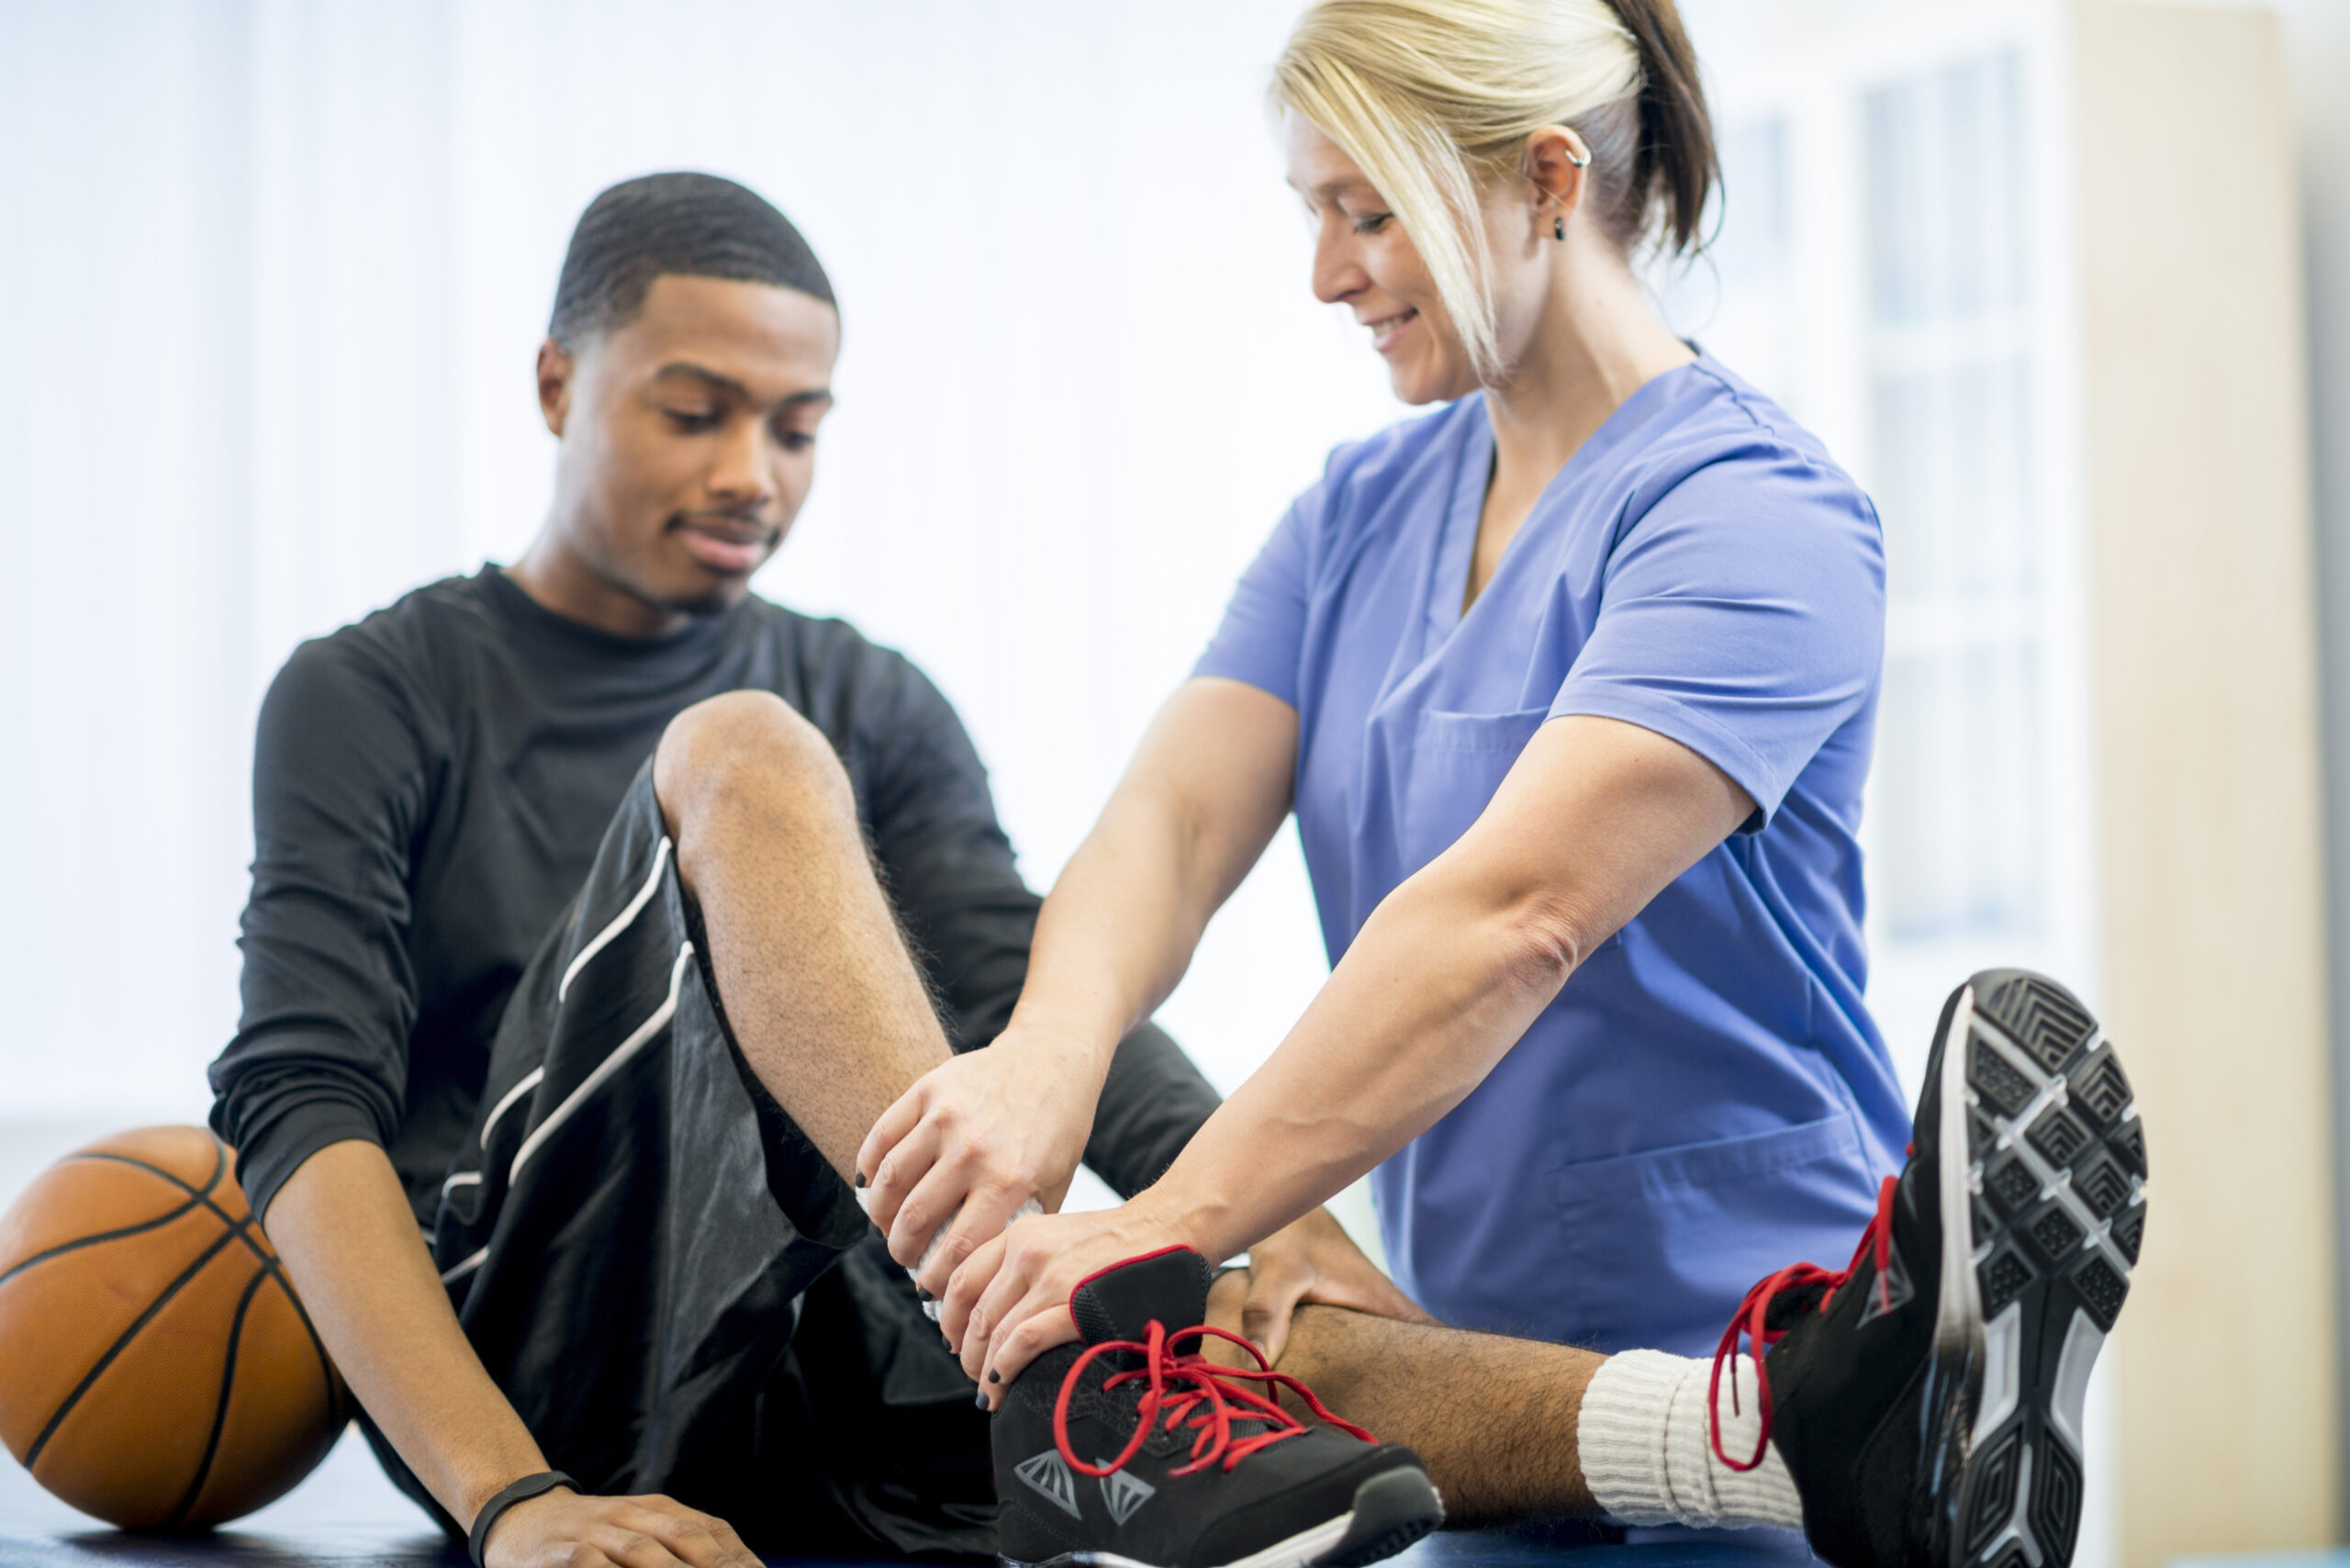 Treating the Rotational Athlete: From Injury to Peak Performance